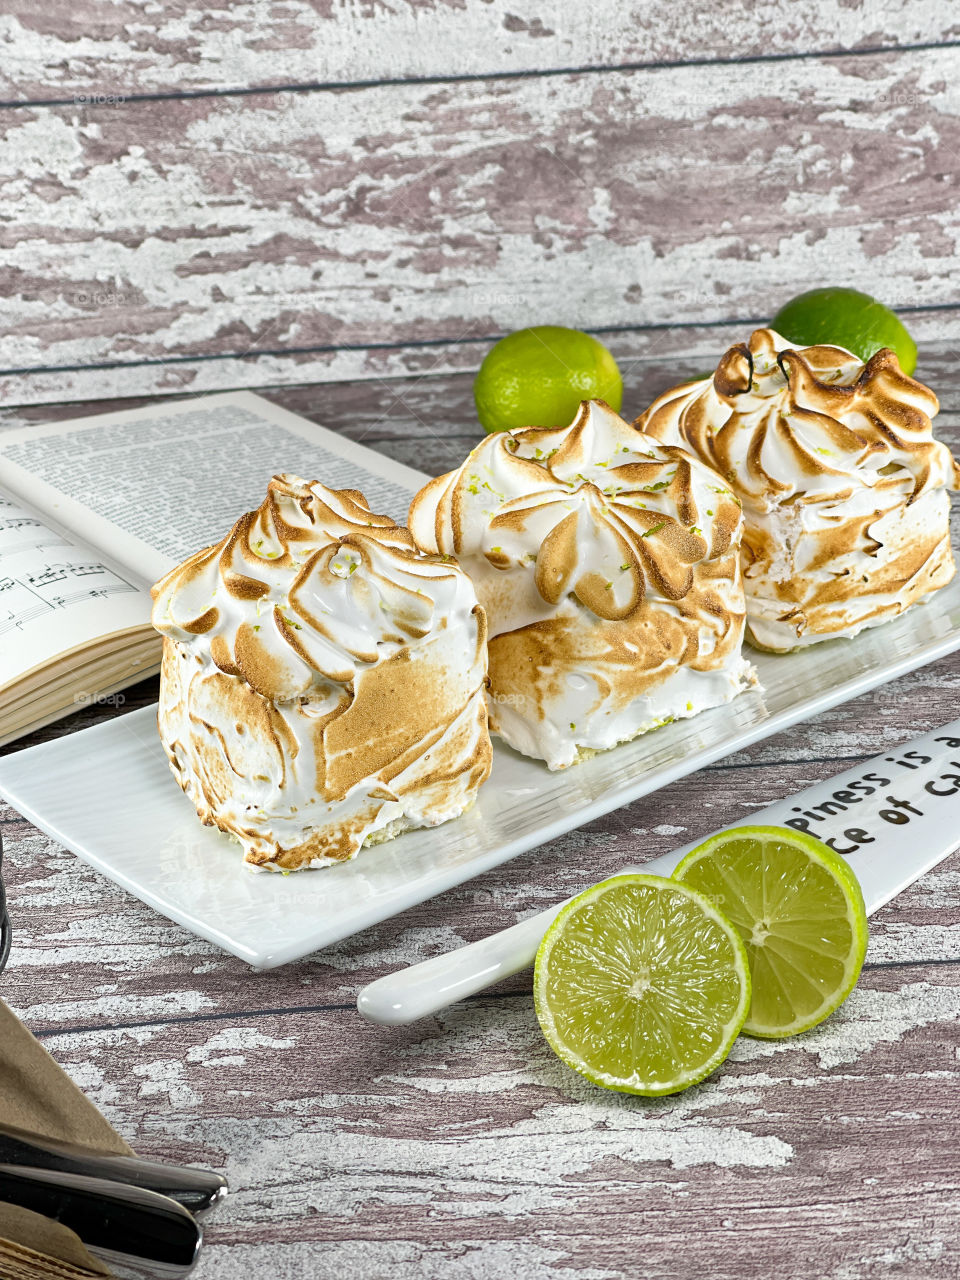 Cake with lime and merengue